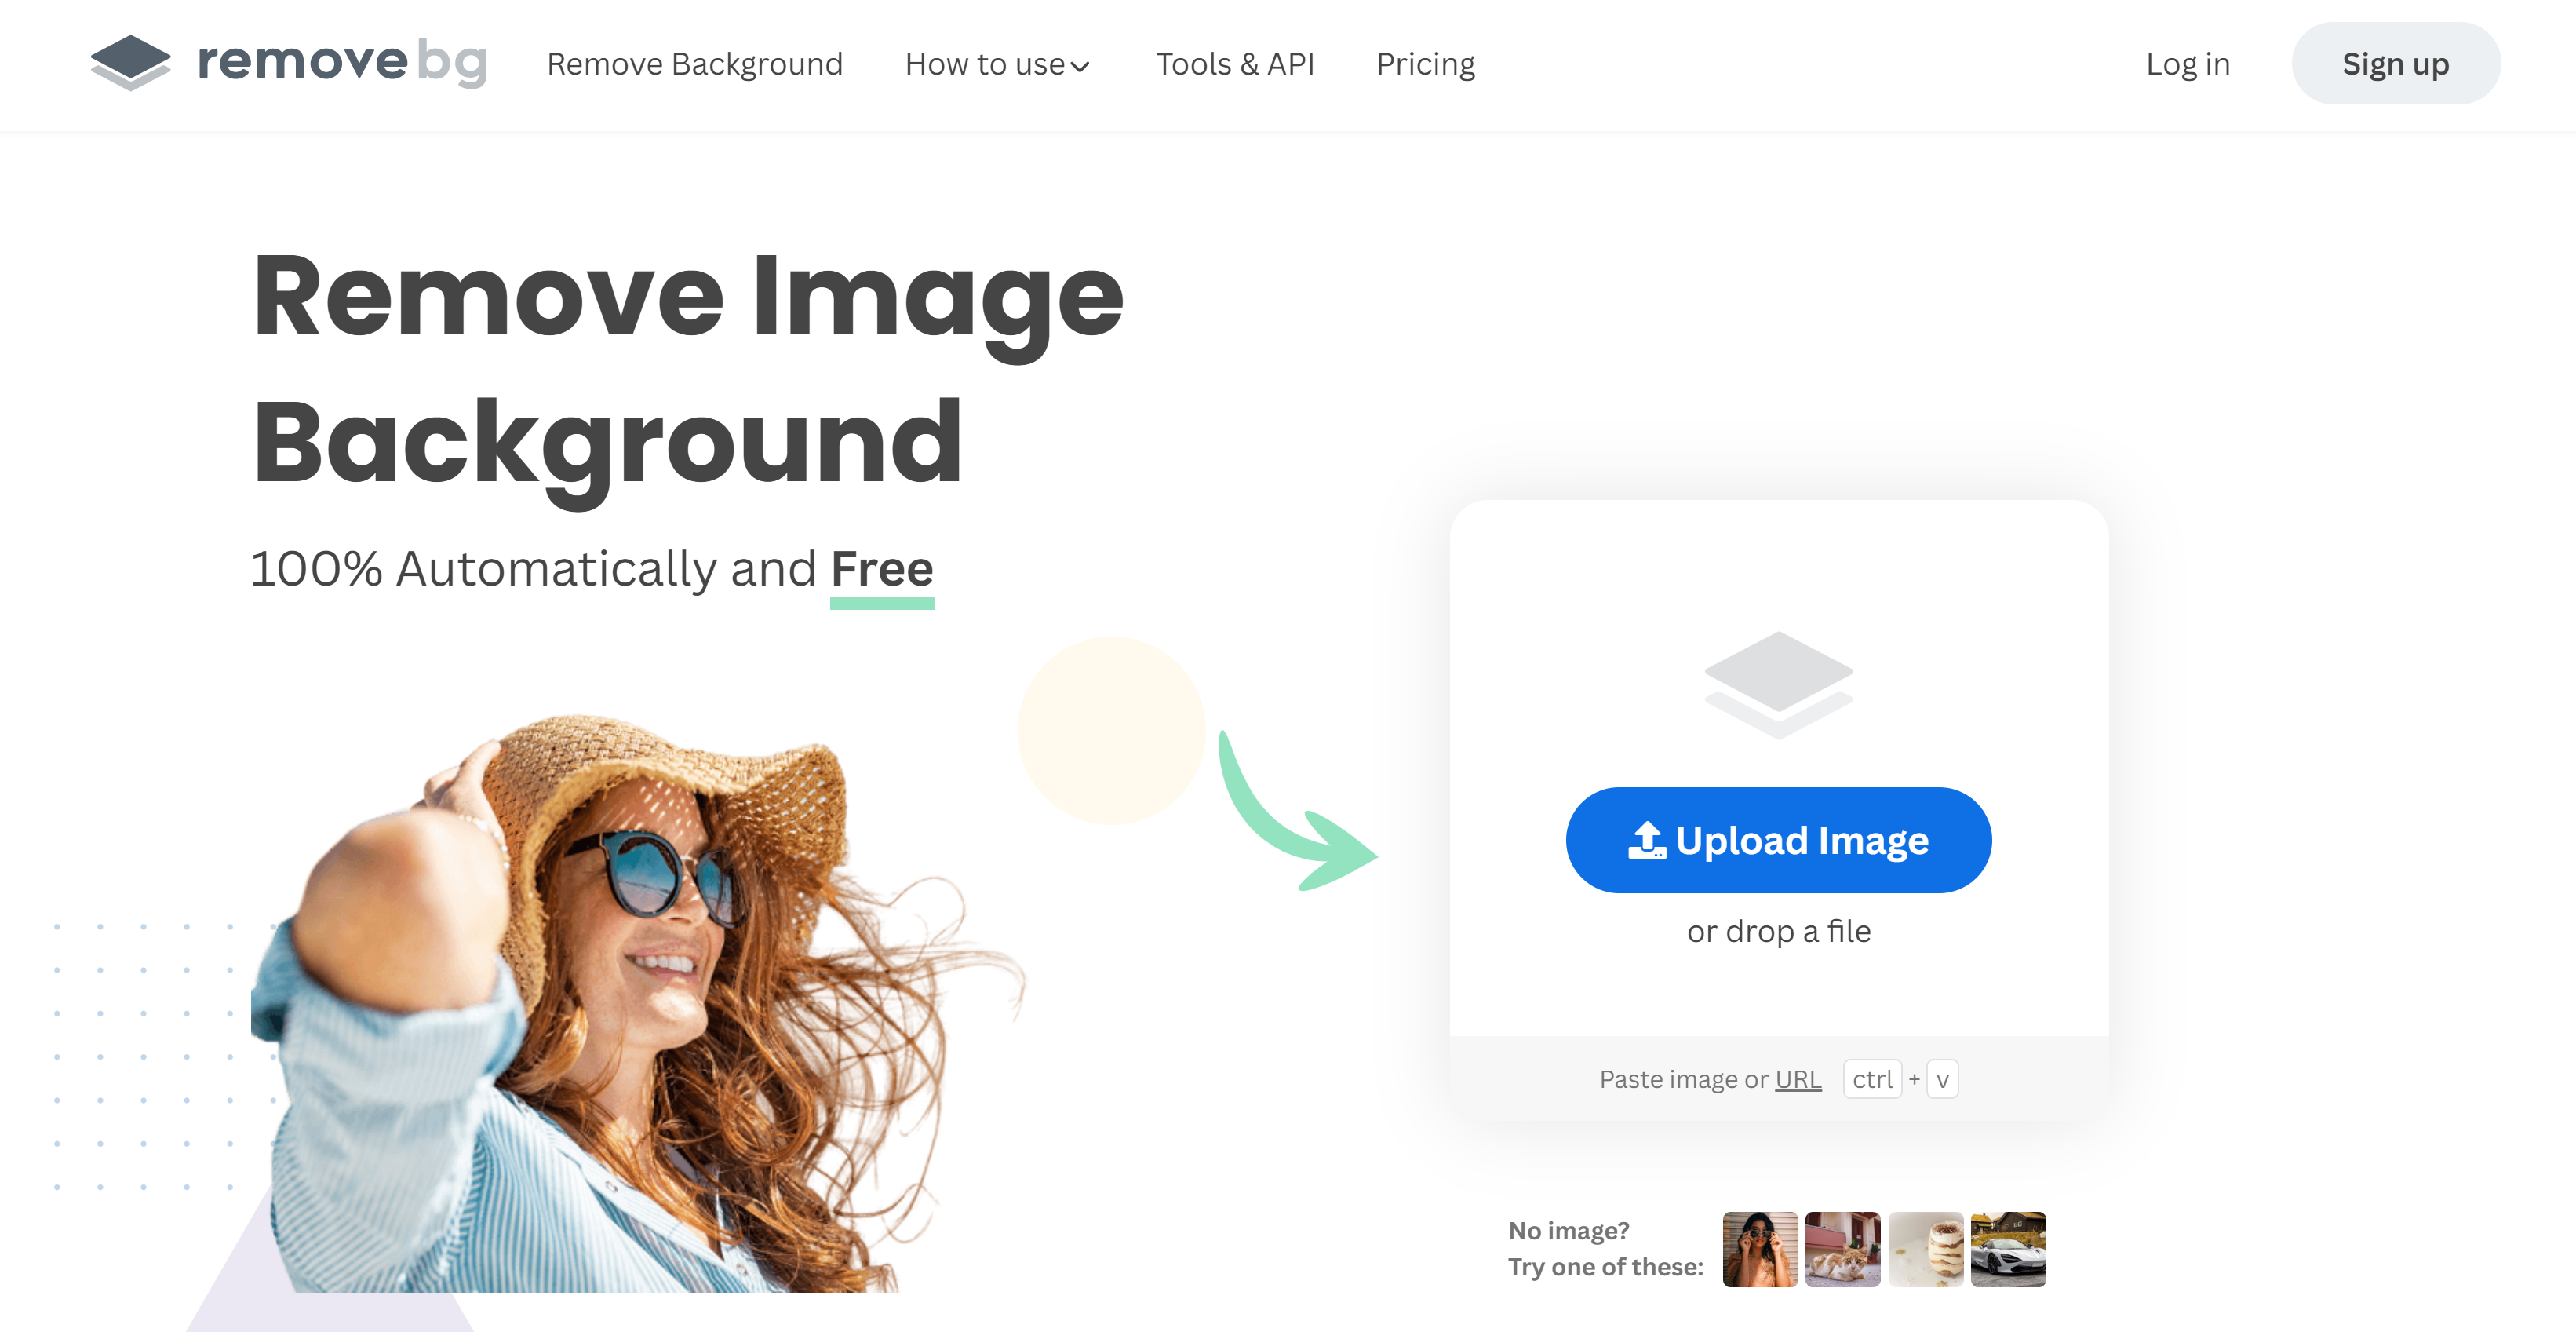 RemovebgThis tool can remove backgrounds instantly with just one click